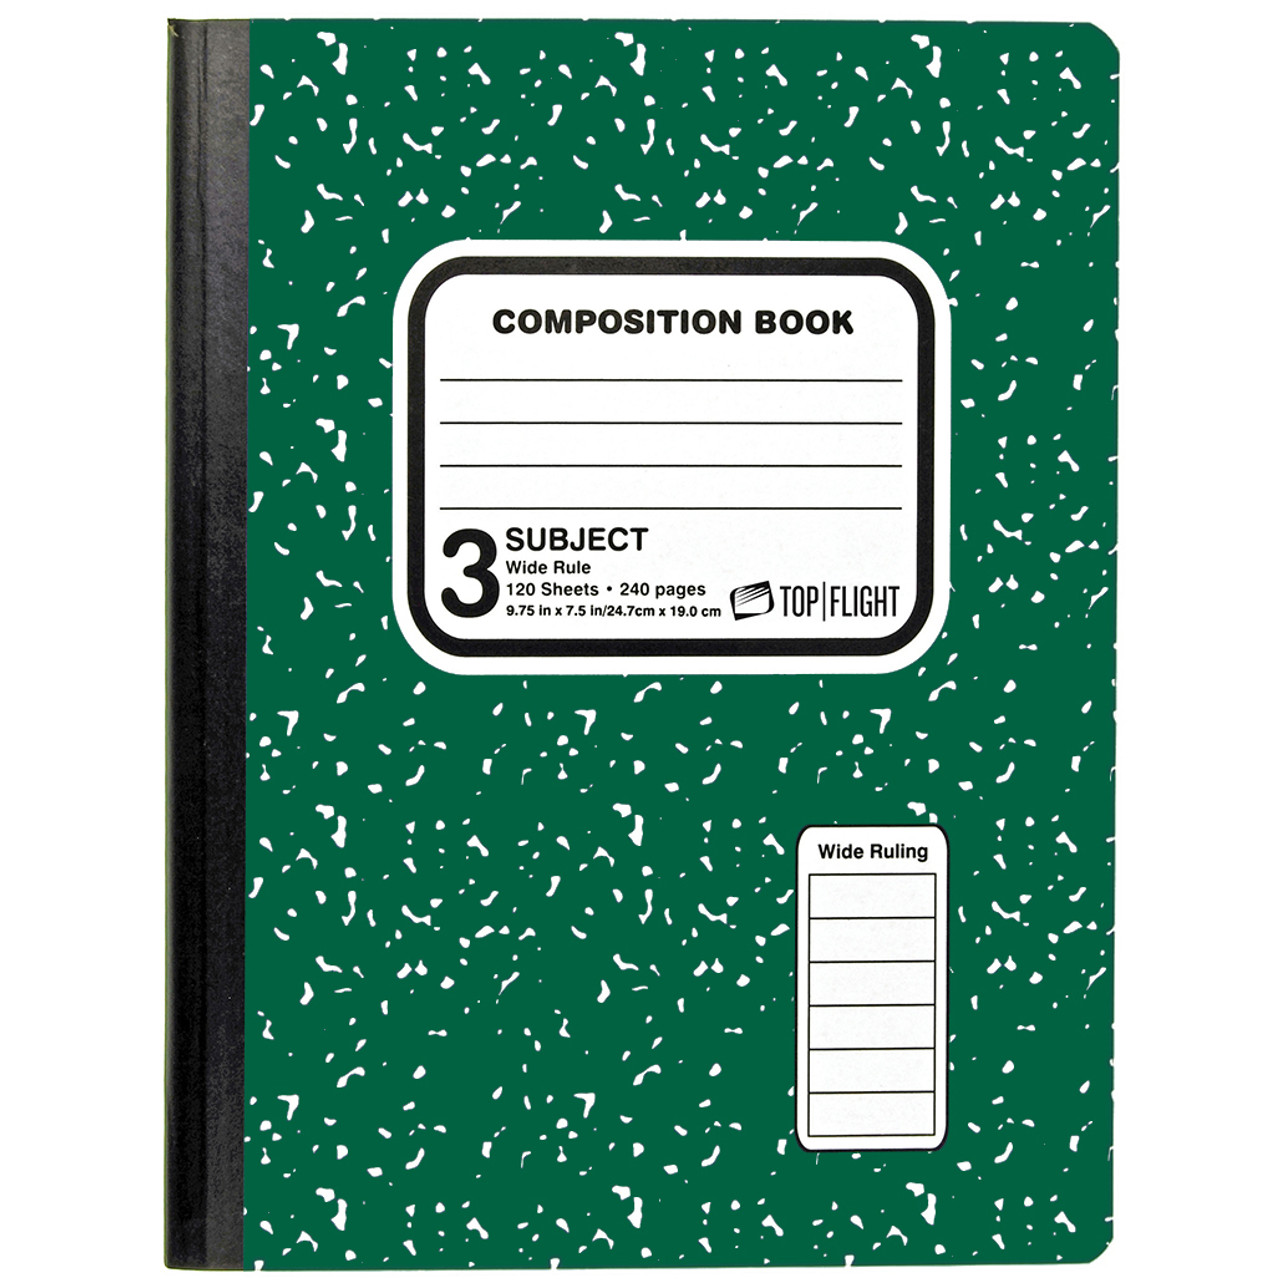 Composition Book, 3 Subject, Wide Rule, 120 Sheets, Green